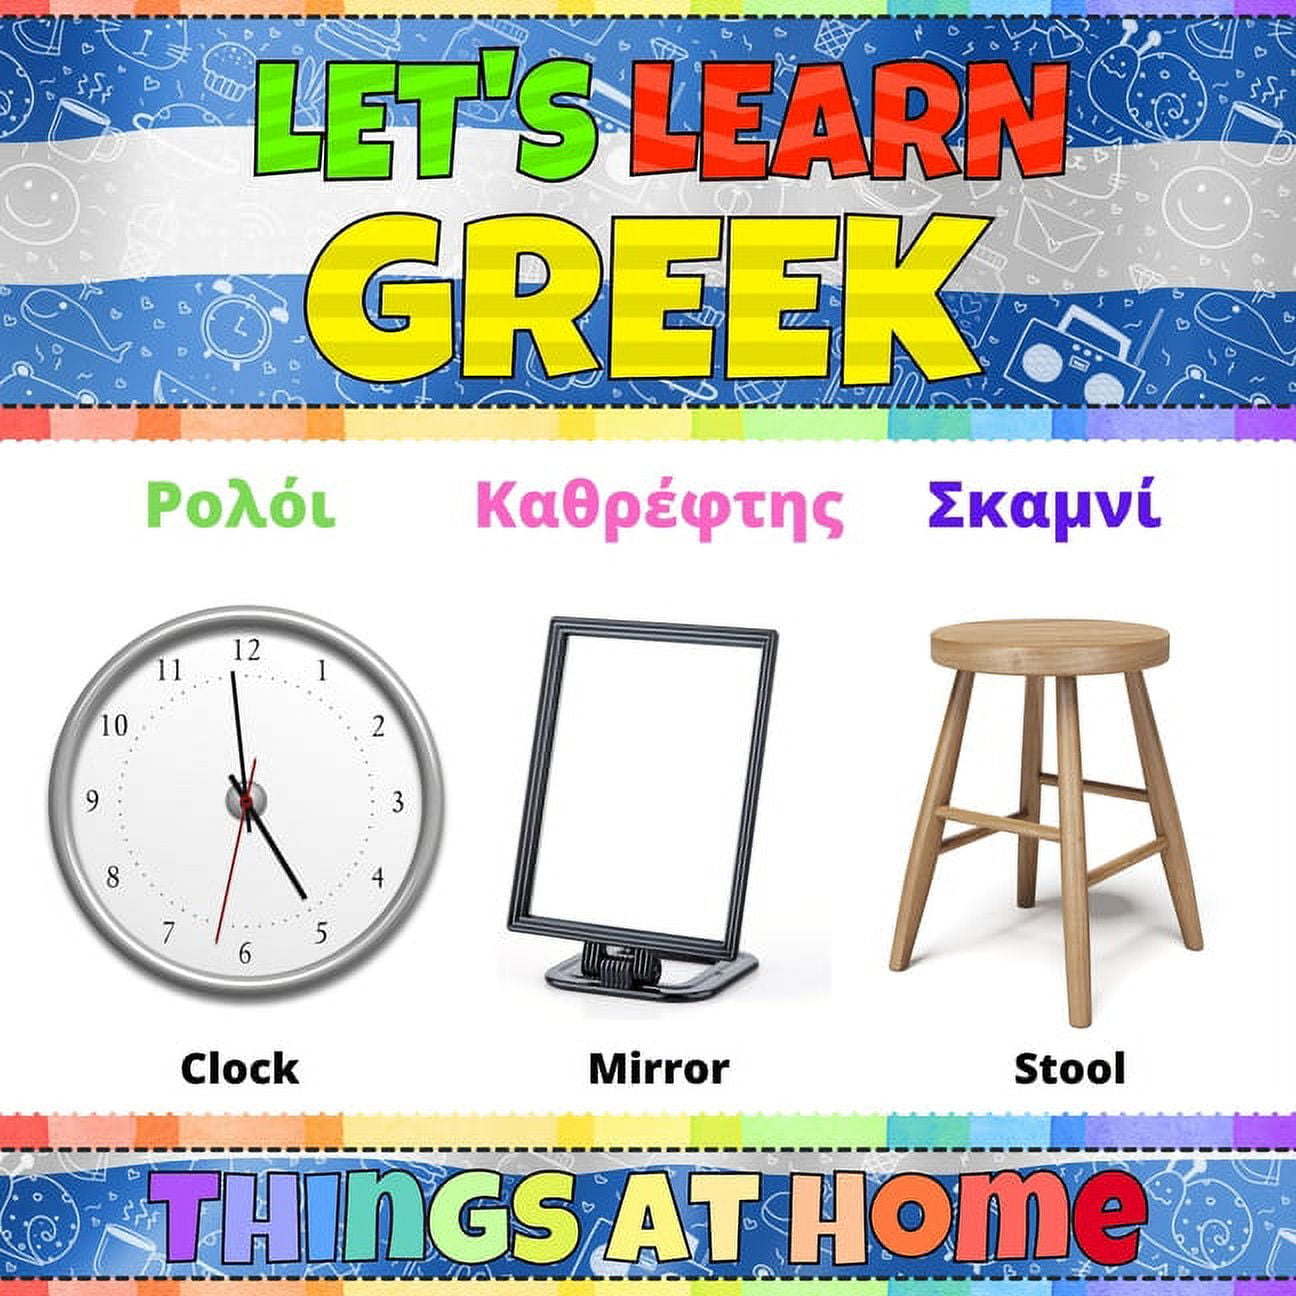 Vocabulary.　Book　Greek　of　Bilingual　Greek　Your　Greek　Improve　Things　Greek　Learning　Learn　Picture　For　English　Early　Book　Home:　Kids.　Words　Words　My　Greek　First　Book　Translation.　With　at　Let's　For